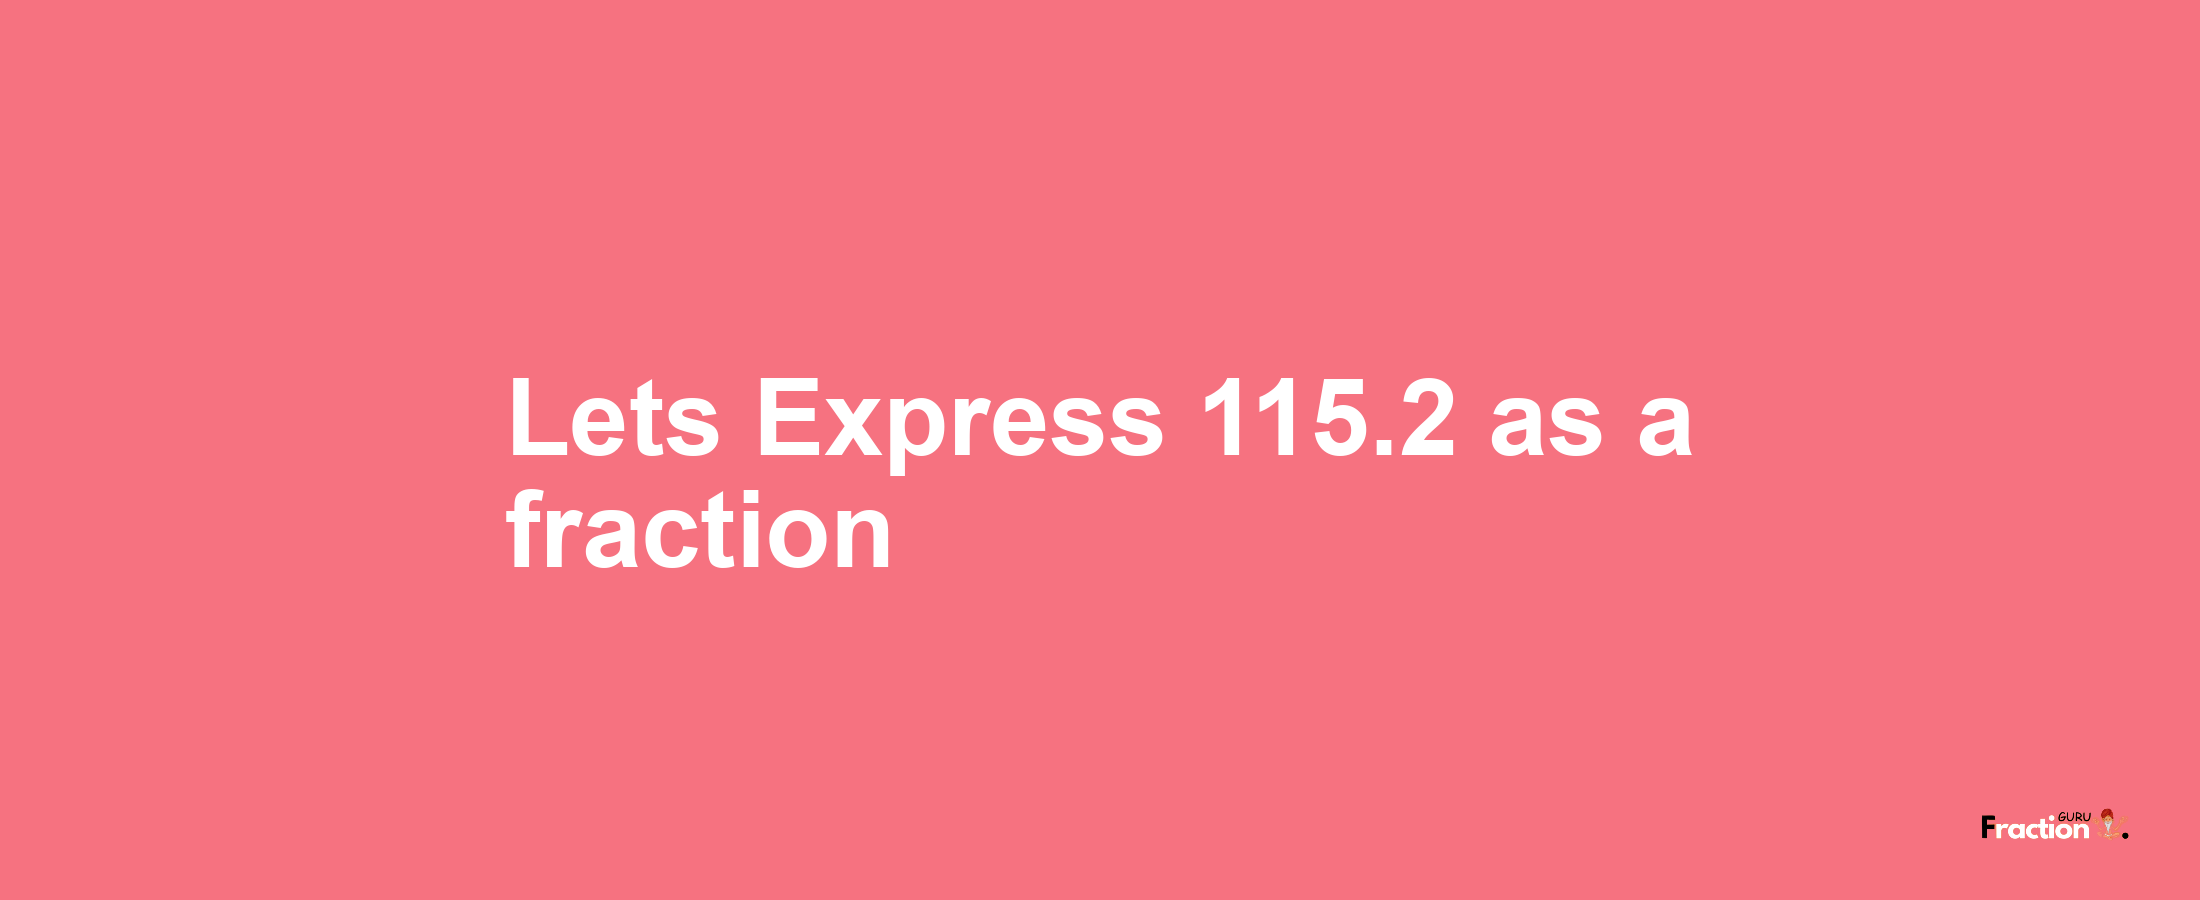 Lets Express 115.2 as afraction